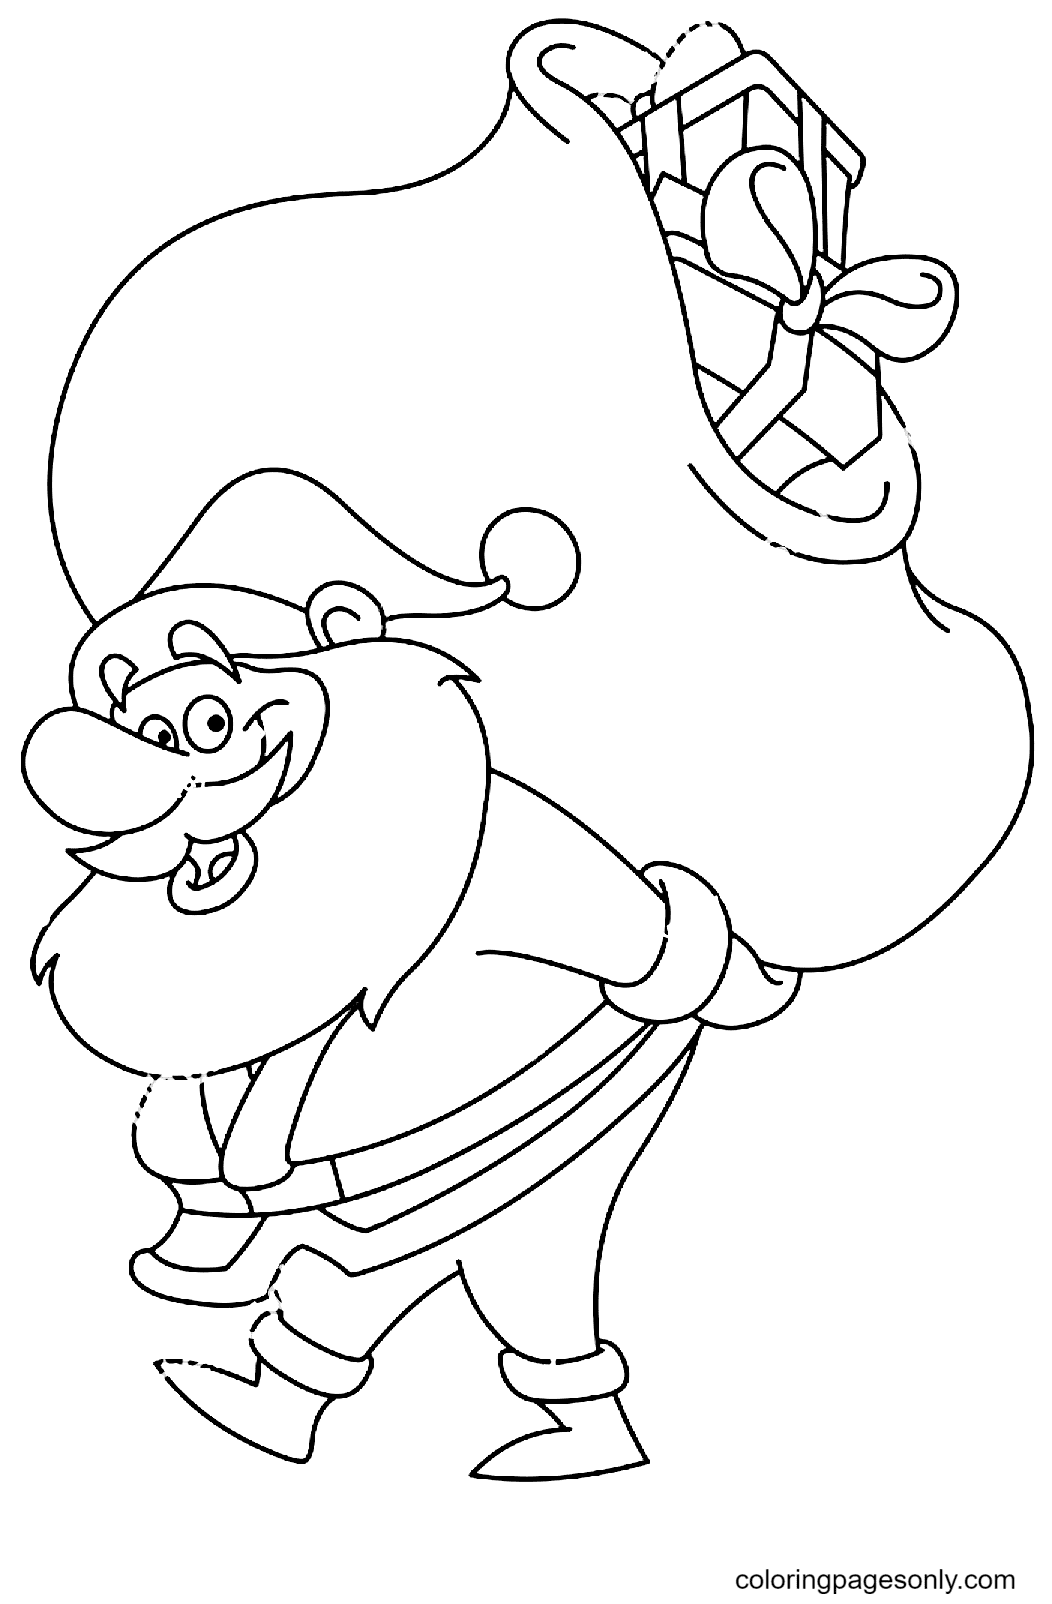 Santa Claus Carries a Large Gift Bag on His Back Coloring Pages